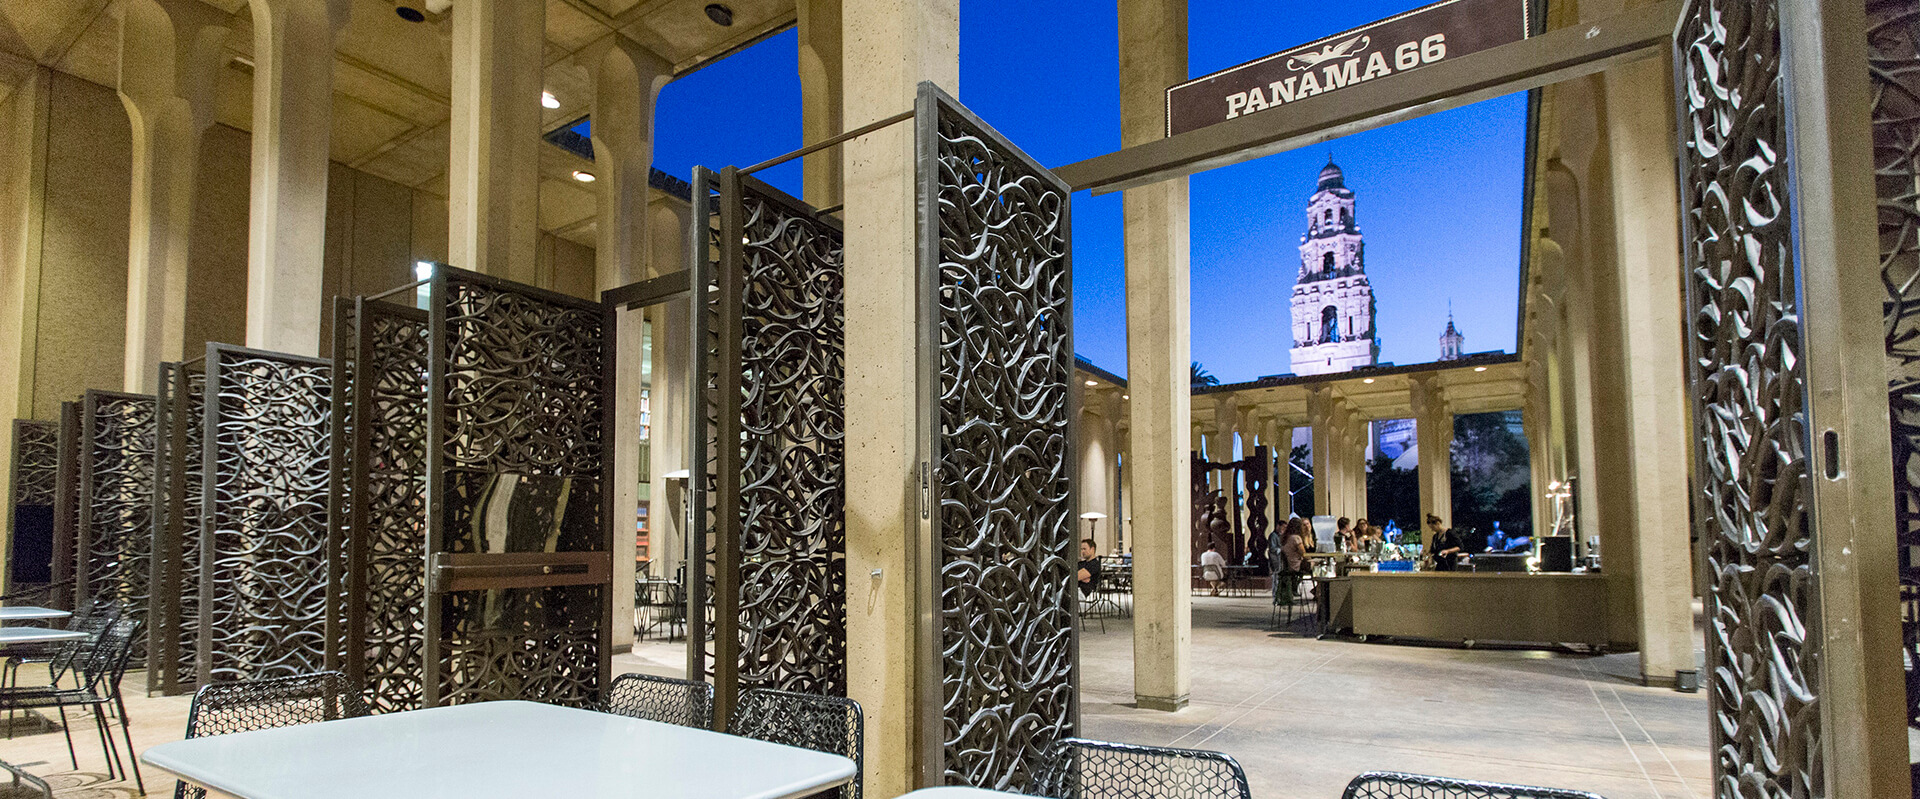 Detailed metal door entrance to Panama 66 at the San Diego Museum of Art. The bar and California Tower can be seen in the background.